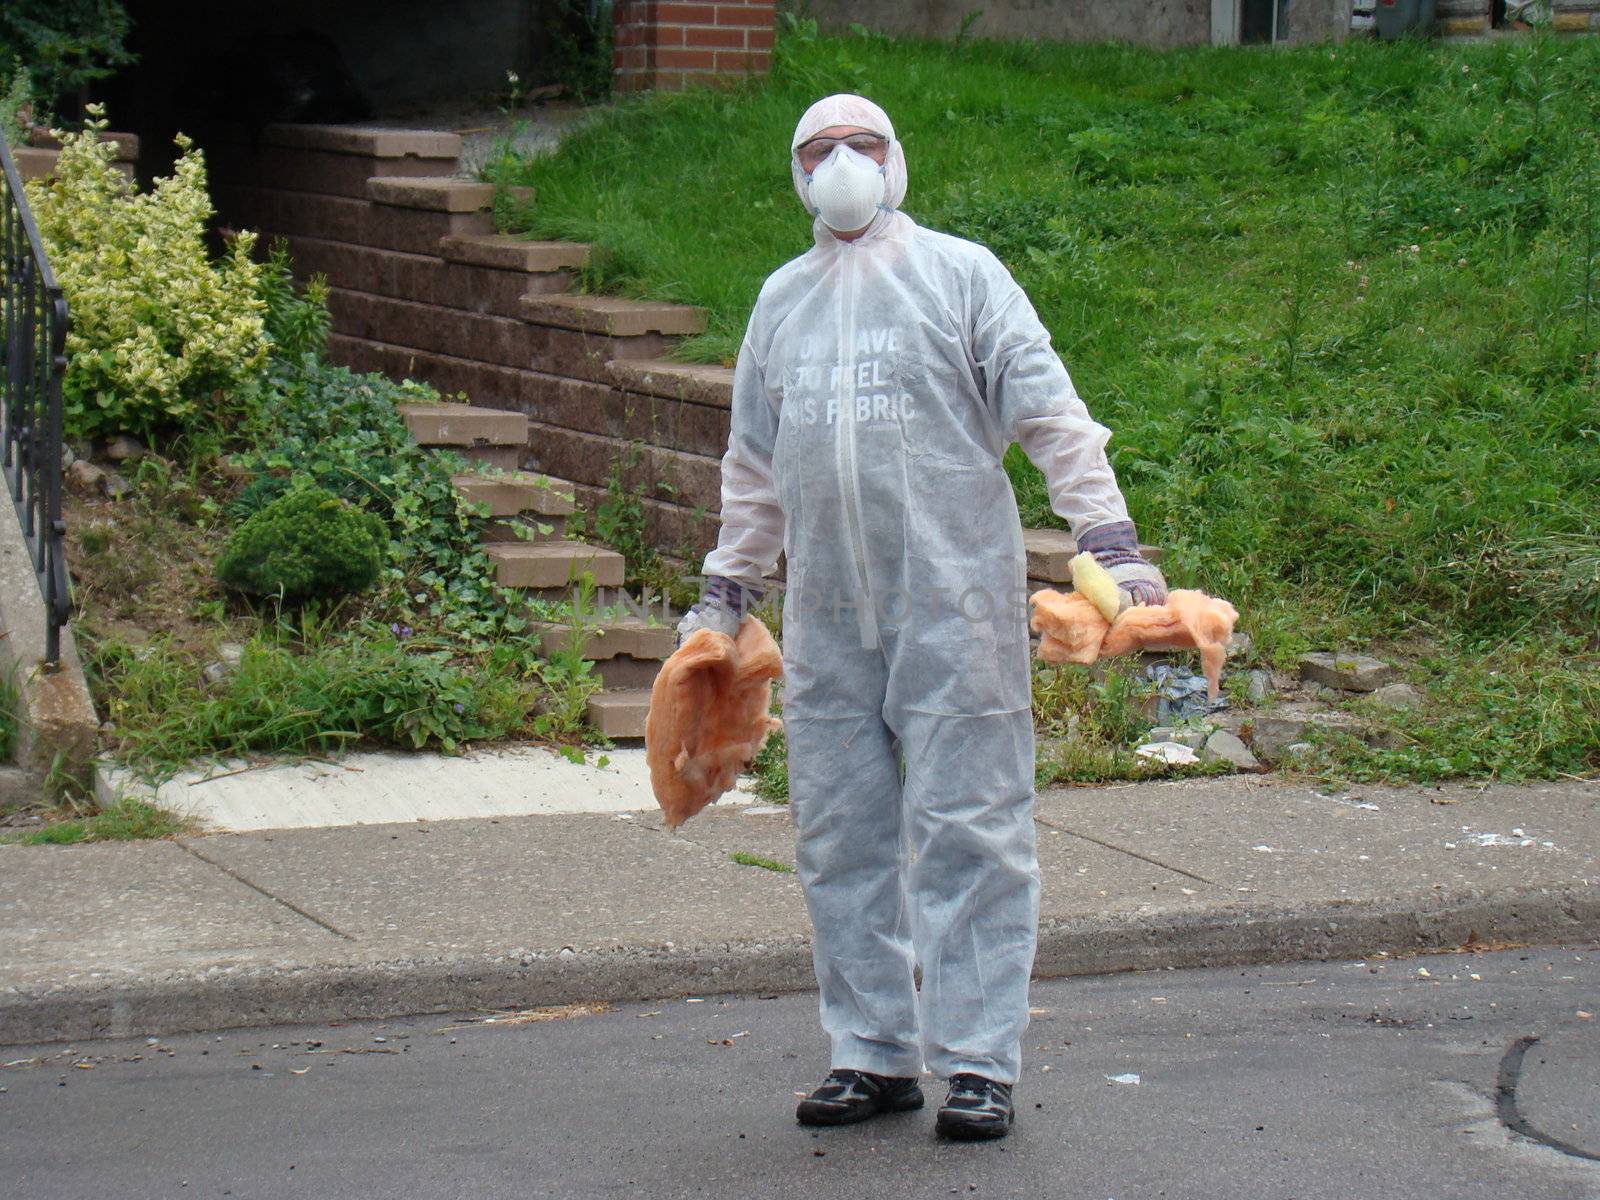 hazzardous waste removal by man wearing protective gear